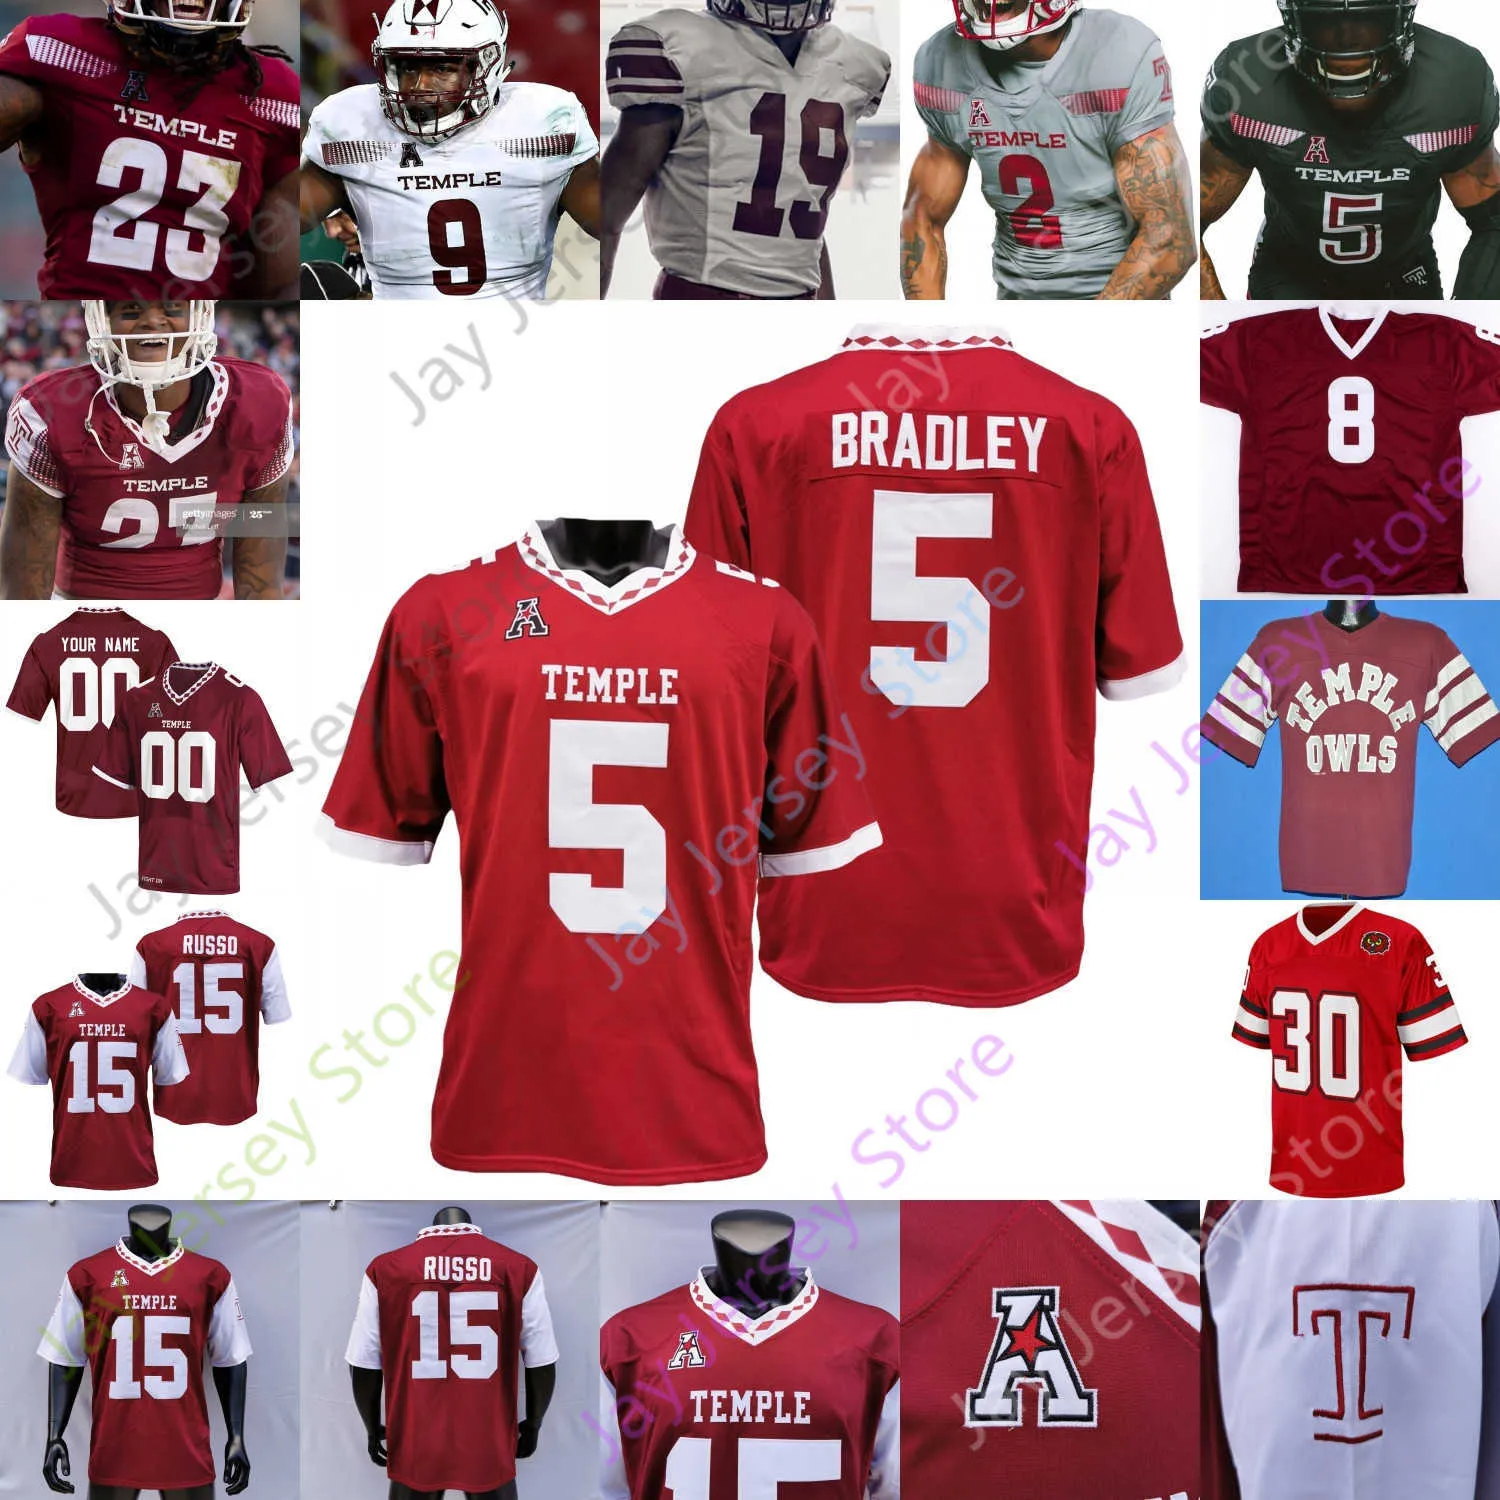 Maillot de Football Temple Owls NCAA Zack Mesday Ryquell Armstead Ventell Bryant Michael Dogbe Matakevich Anderson Wilkerson